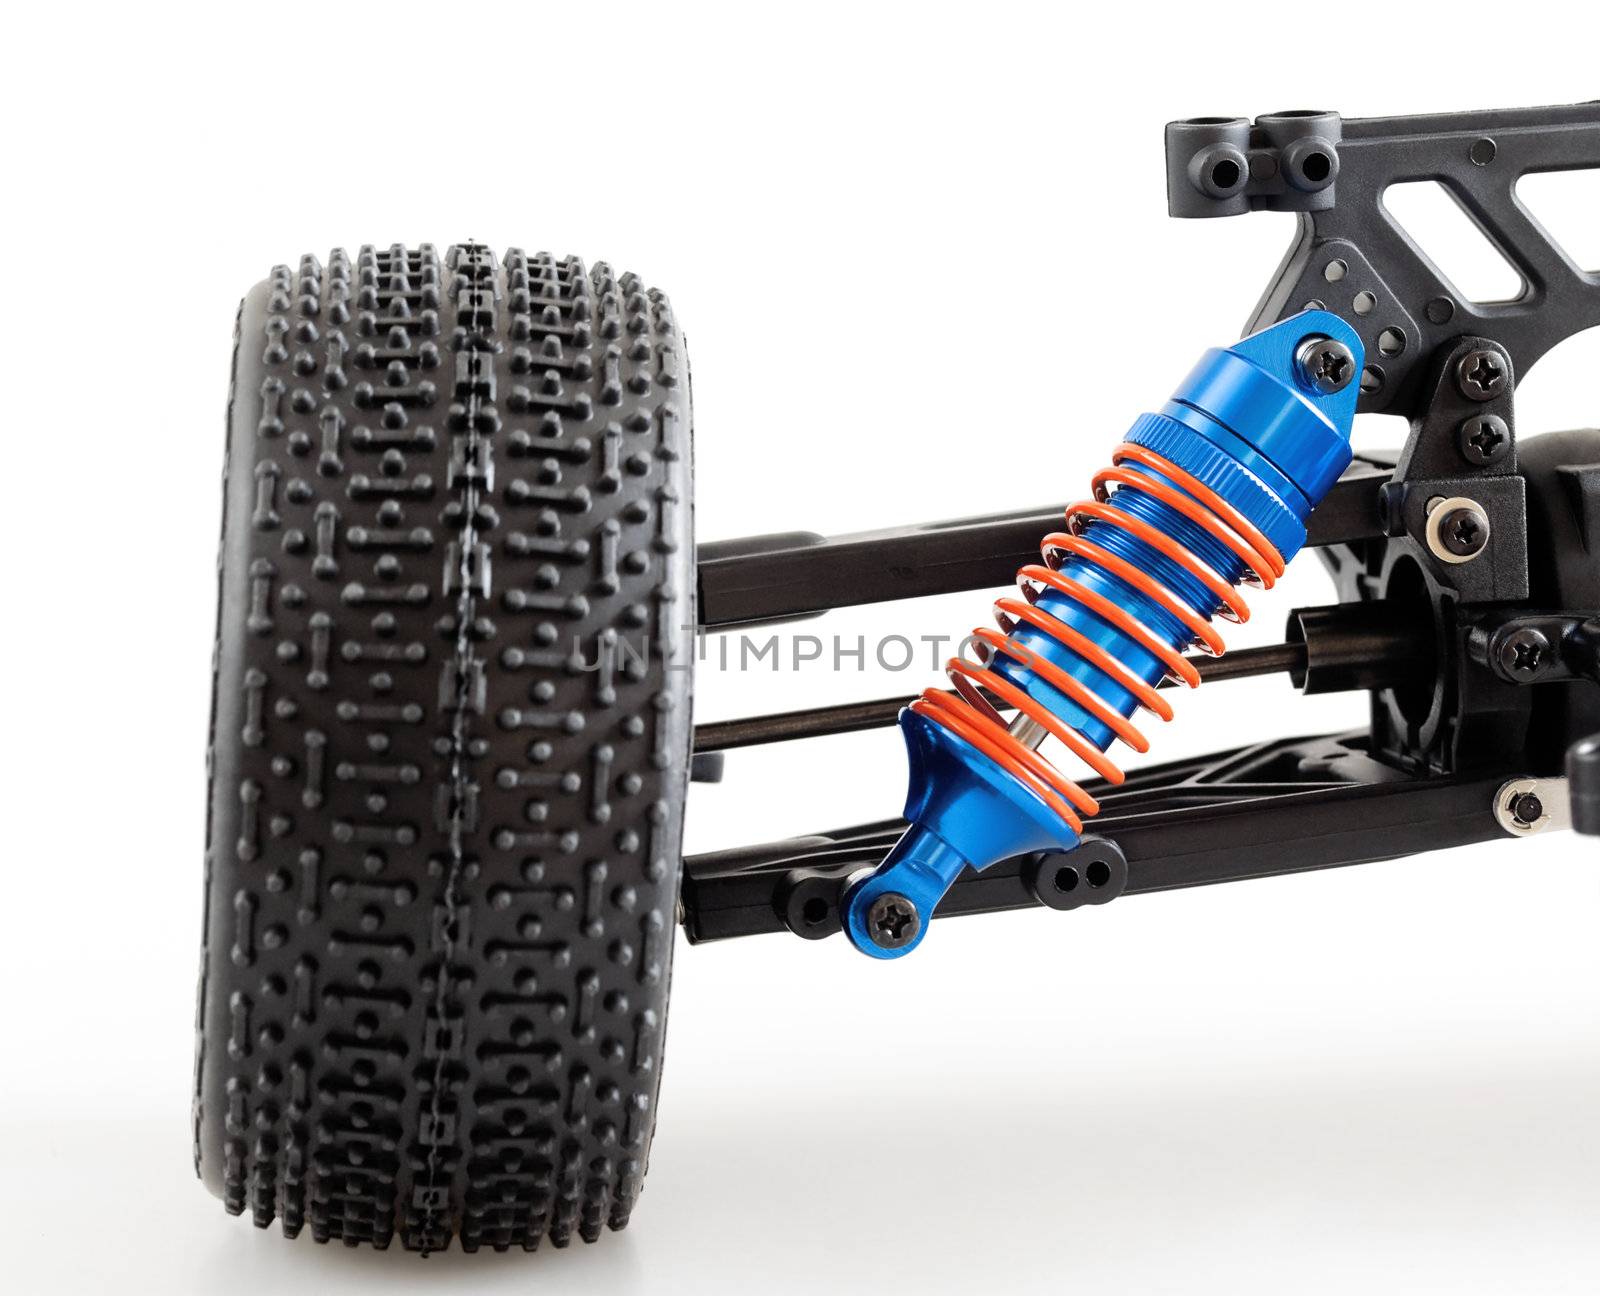 suspension of modern radio controlled car for competitions by Serp